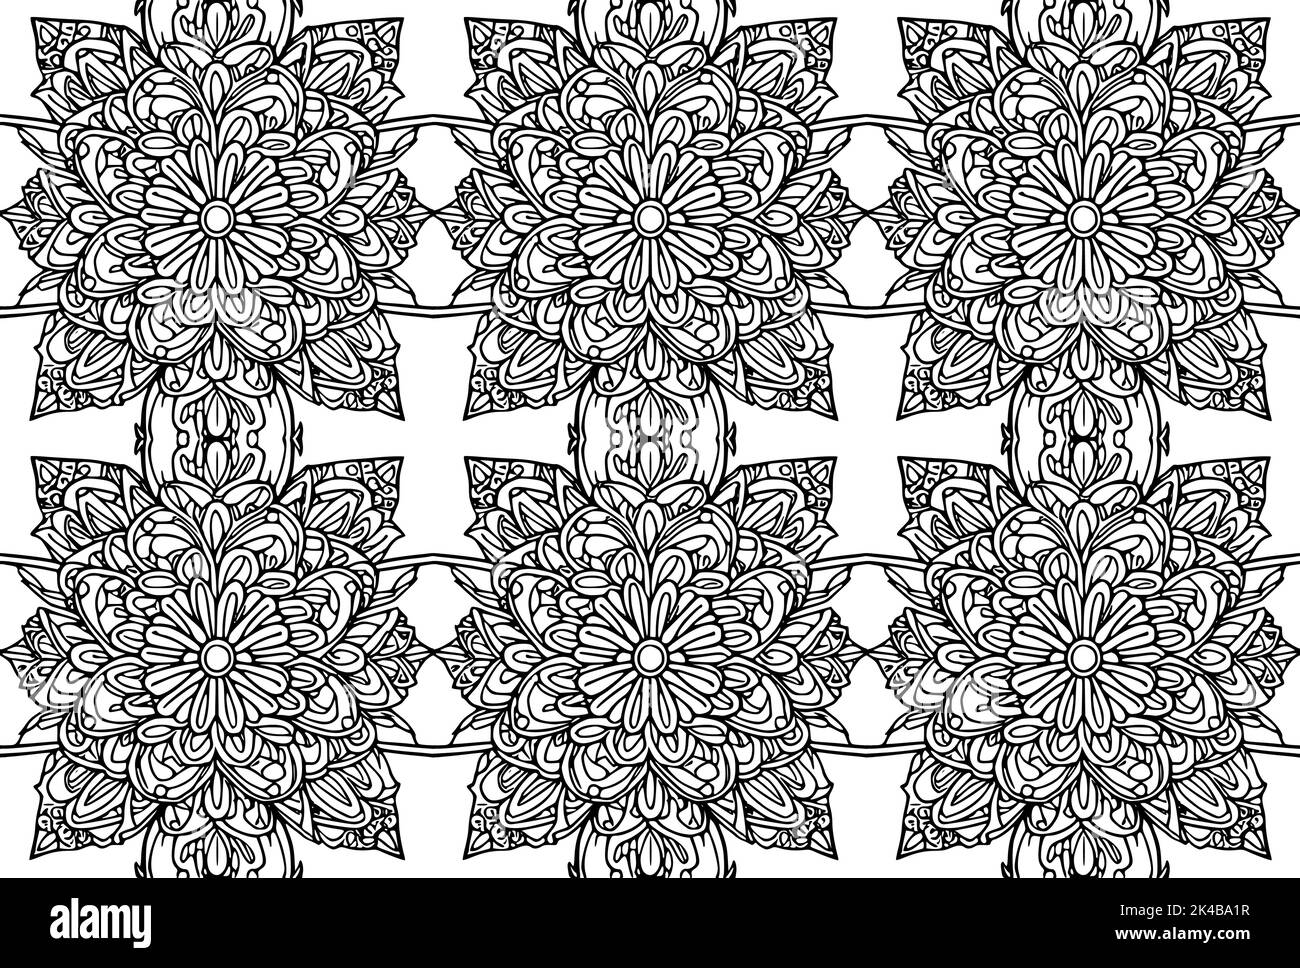 Seamless vector line art pattern made of black line hand drawn flowers on white, coloring book style Stock Vector